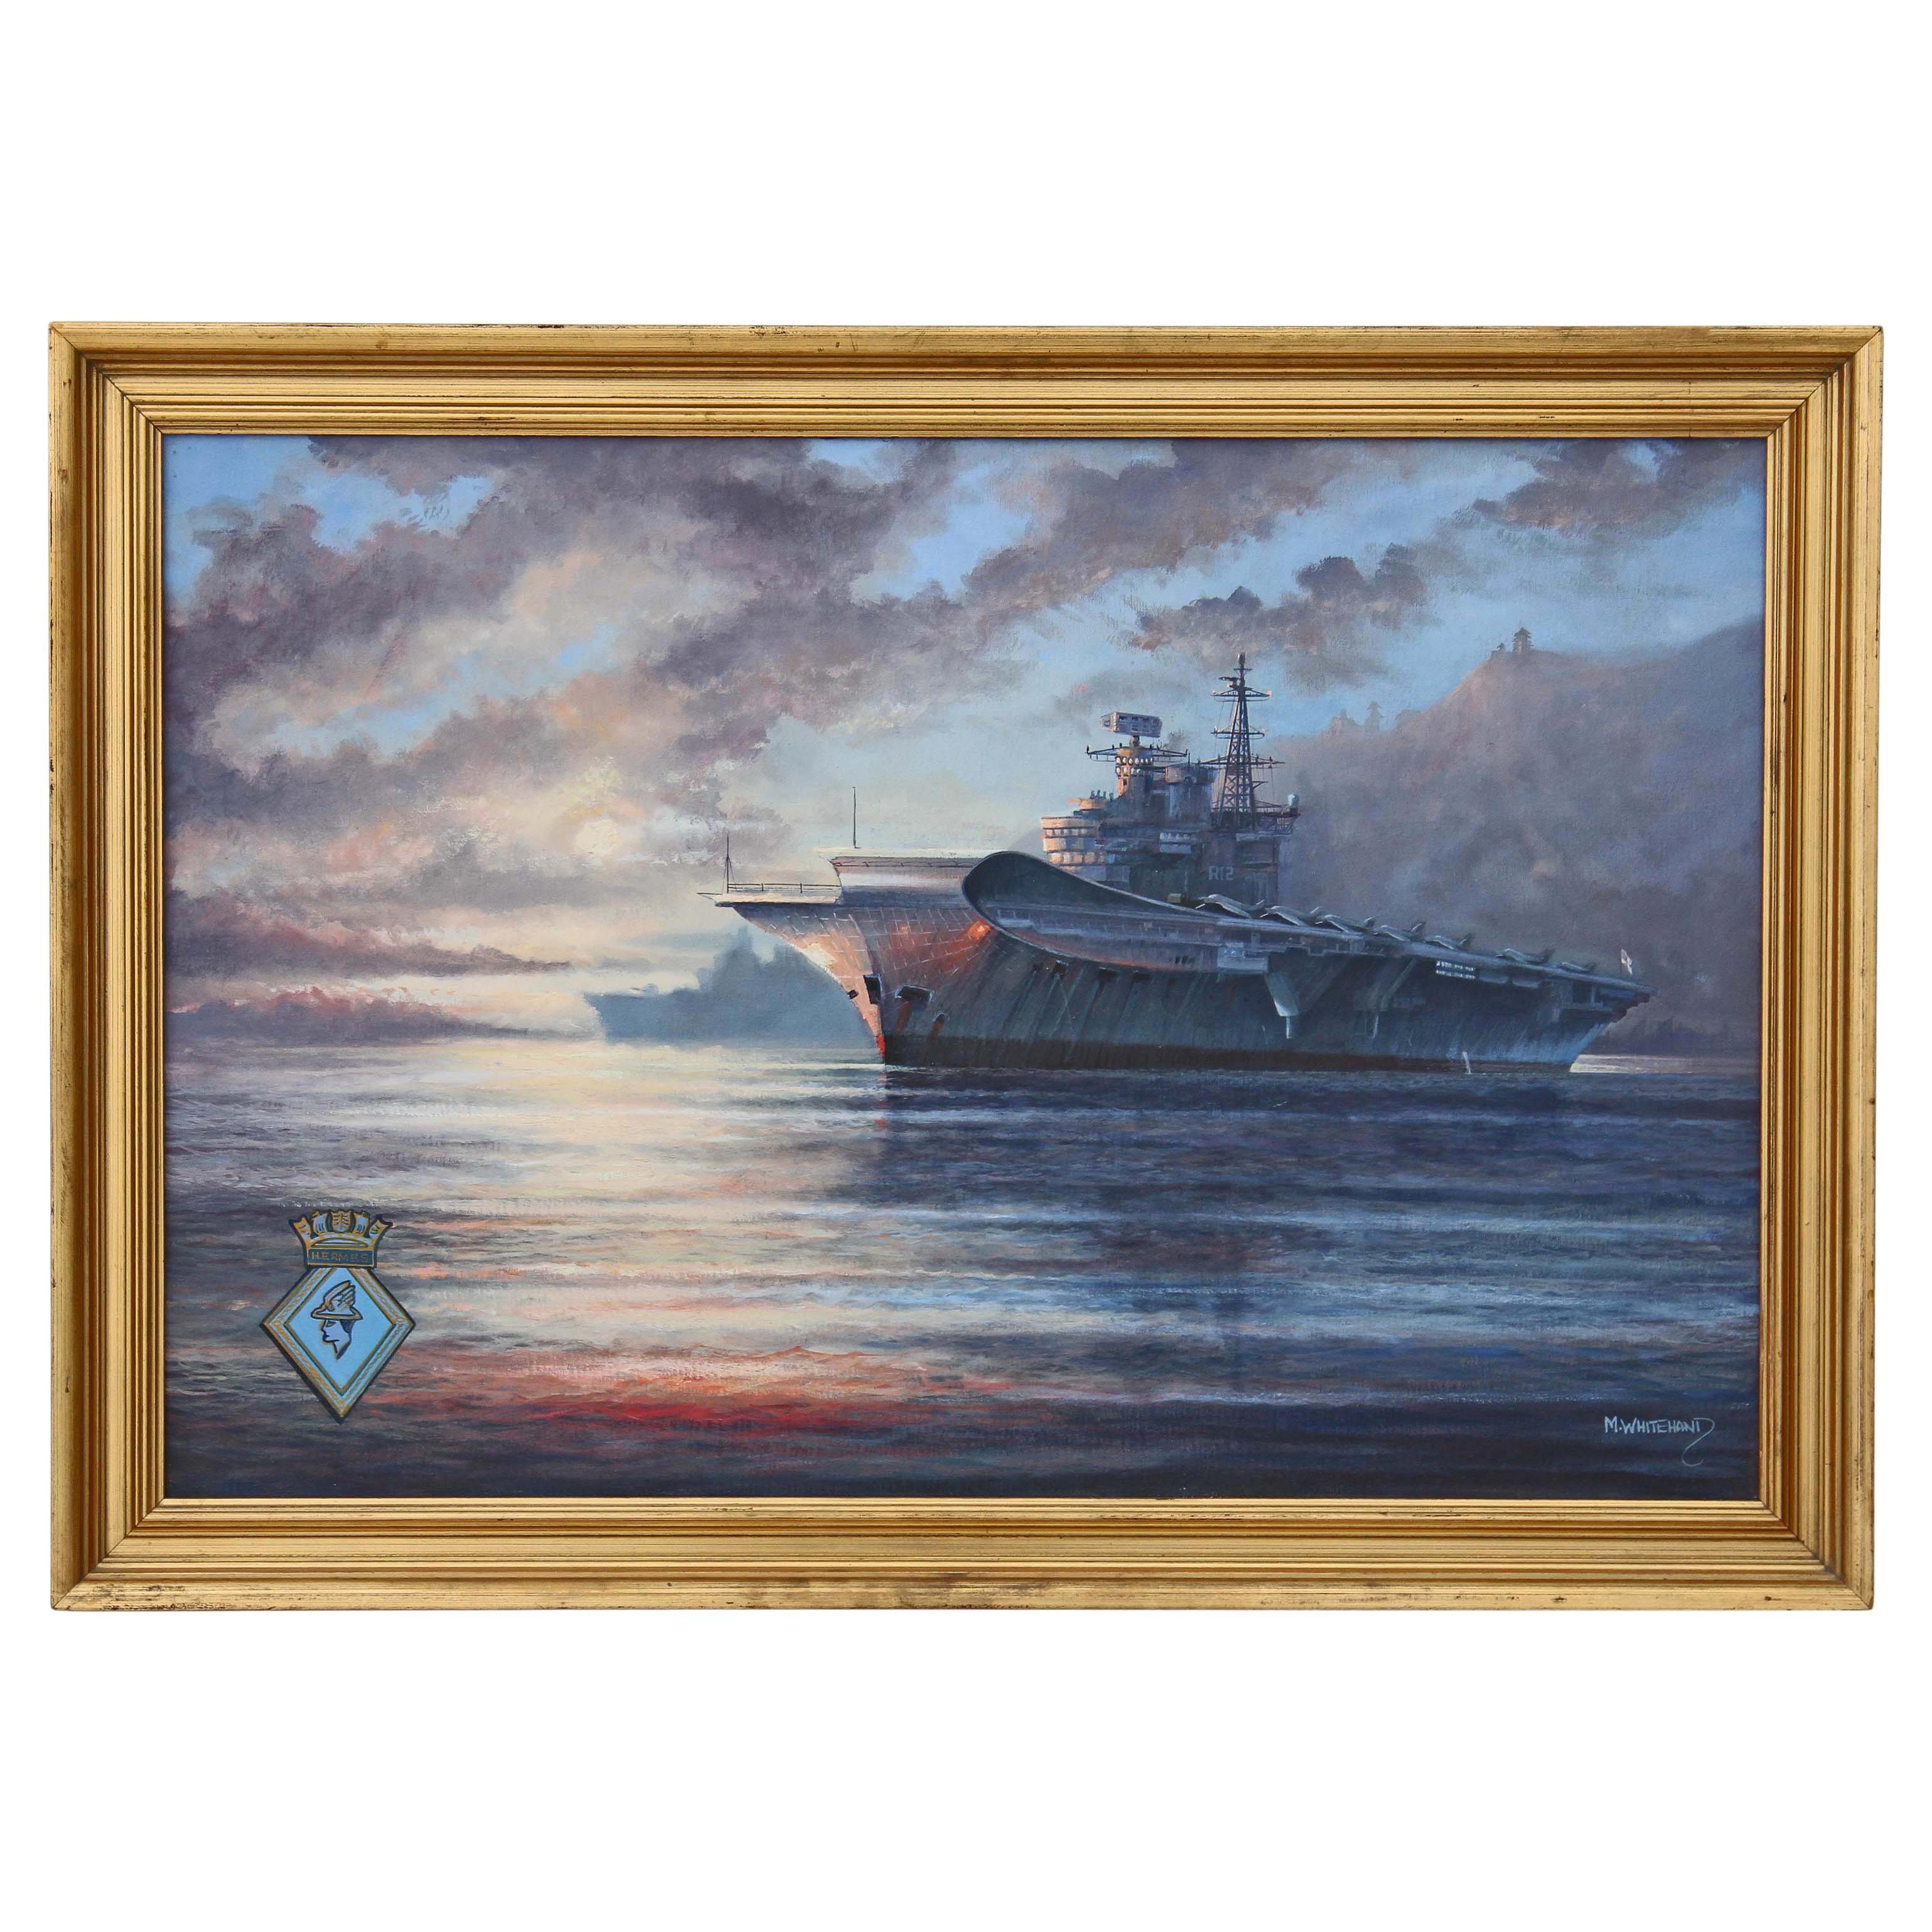 M J Whitehand's High-Quality Large Oil Painting of HMS Hermes Aircraft Carrier For Sale